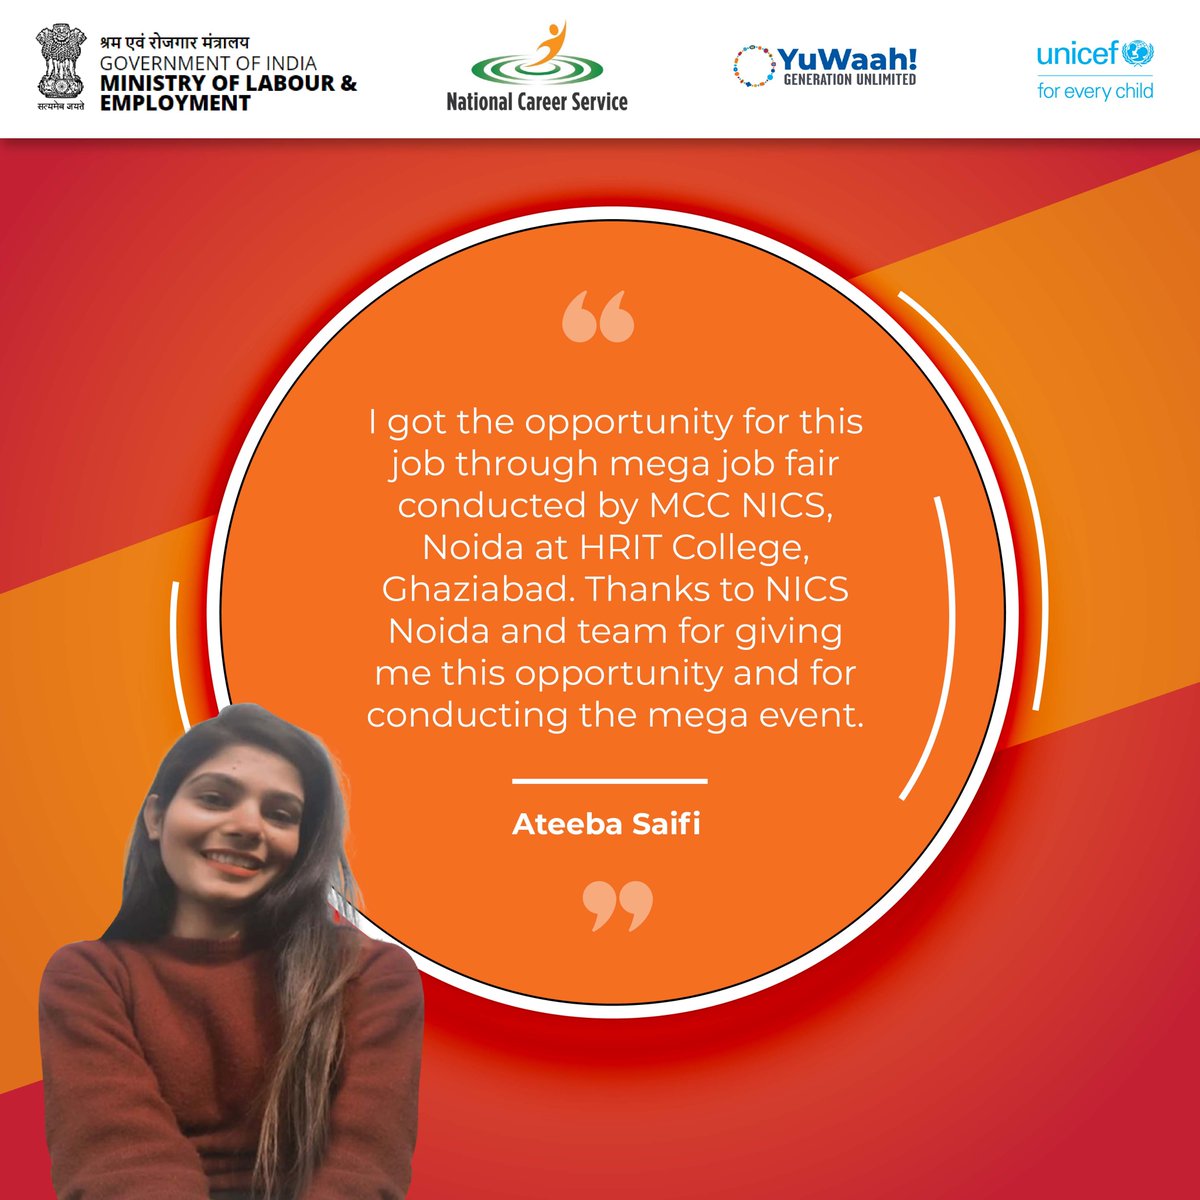 Our young trailblazer - Ateeba Saifi, talks about how being a part of the job fair by @NCSIndia helped her take a step closer to achieving her dreams. Register today on the portal and elevate your career trajectory: ncs.gov.in/Pages/default.… @LabourMinistry @UNICEFIndia